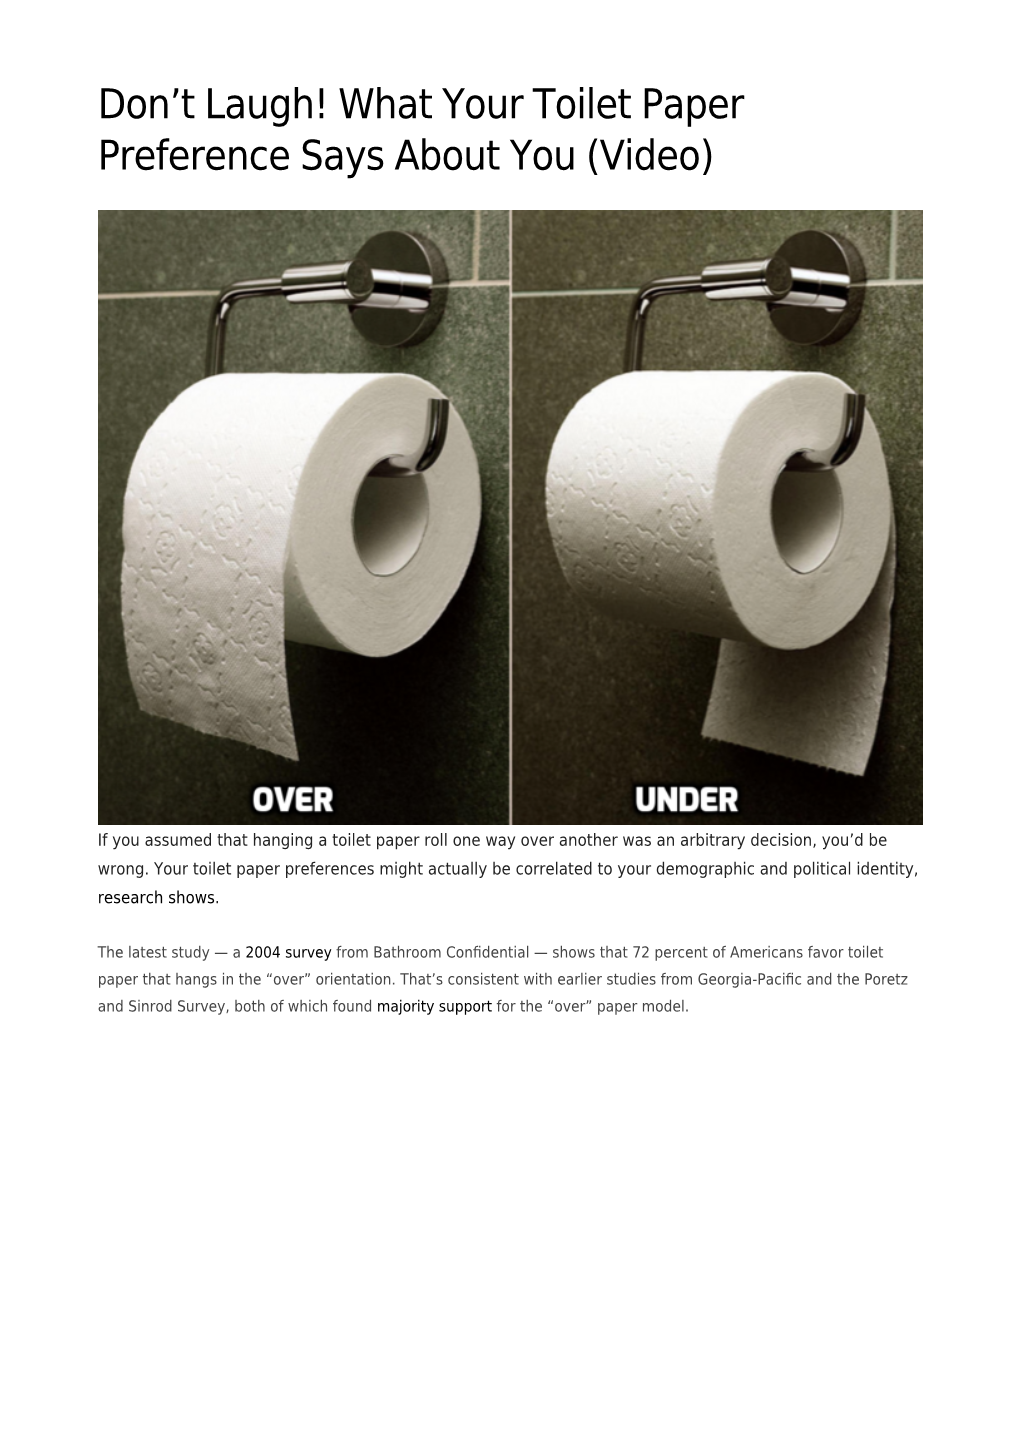 What Your Toilet Paper Preference Says About You (Video)